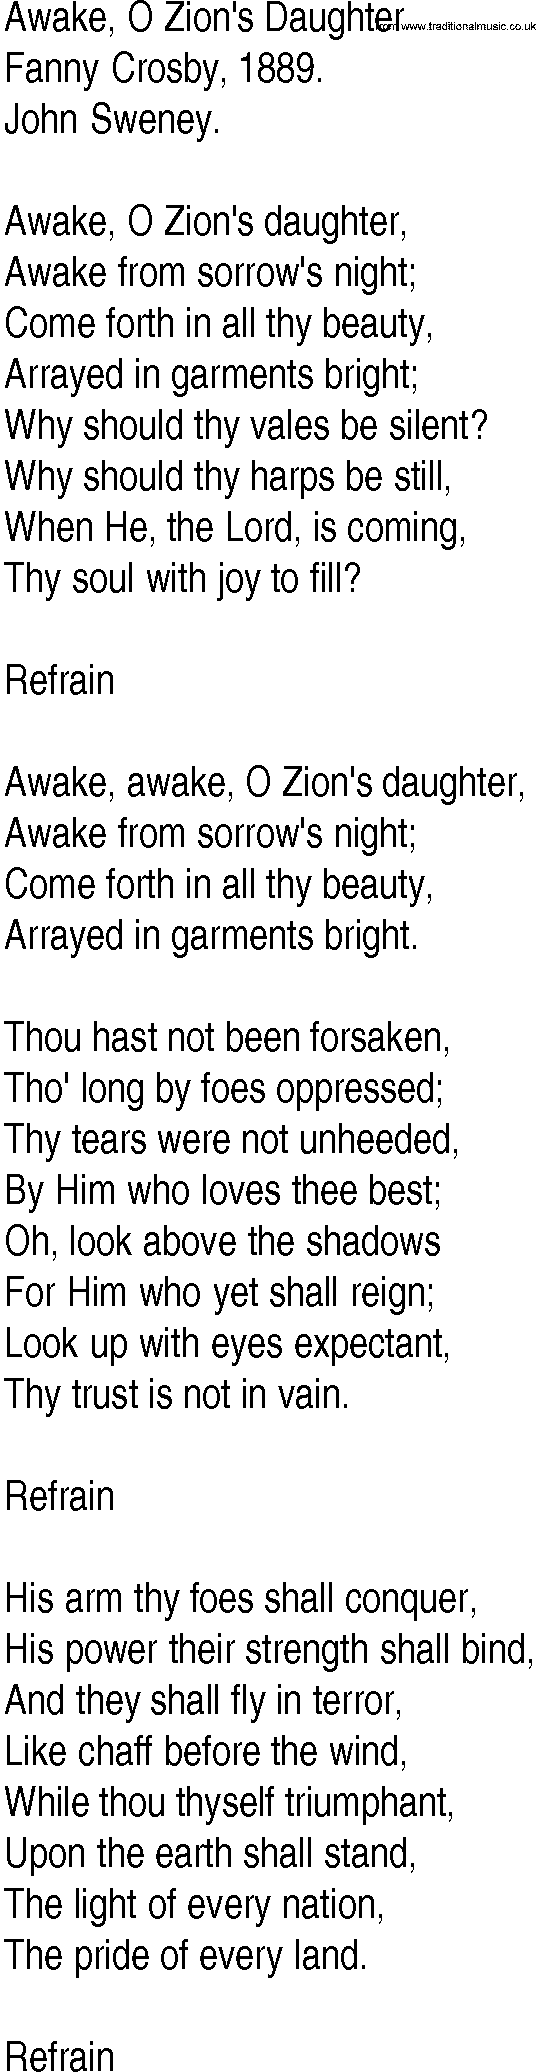 Hymn and Gospel Song: Awake, O Zion's Daughter by Fanny Crosby lyrics